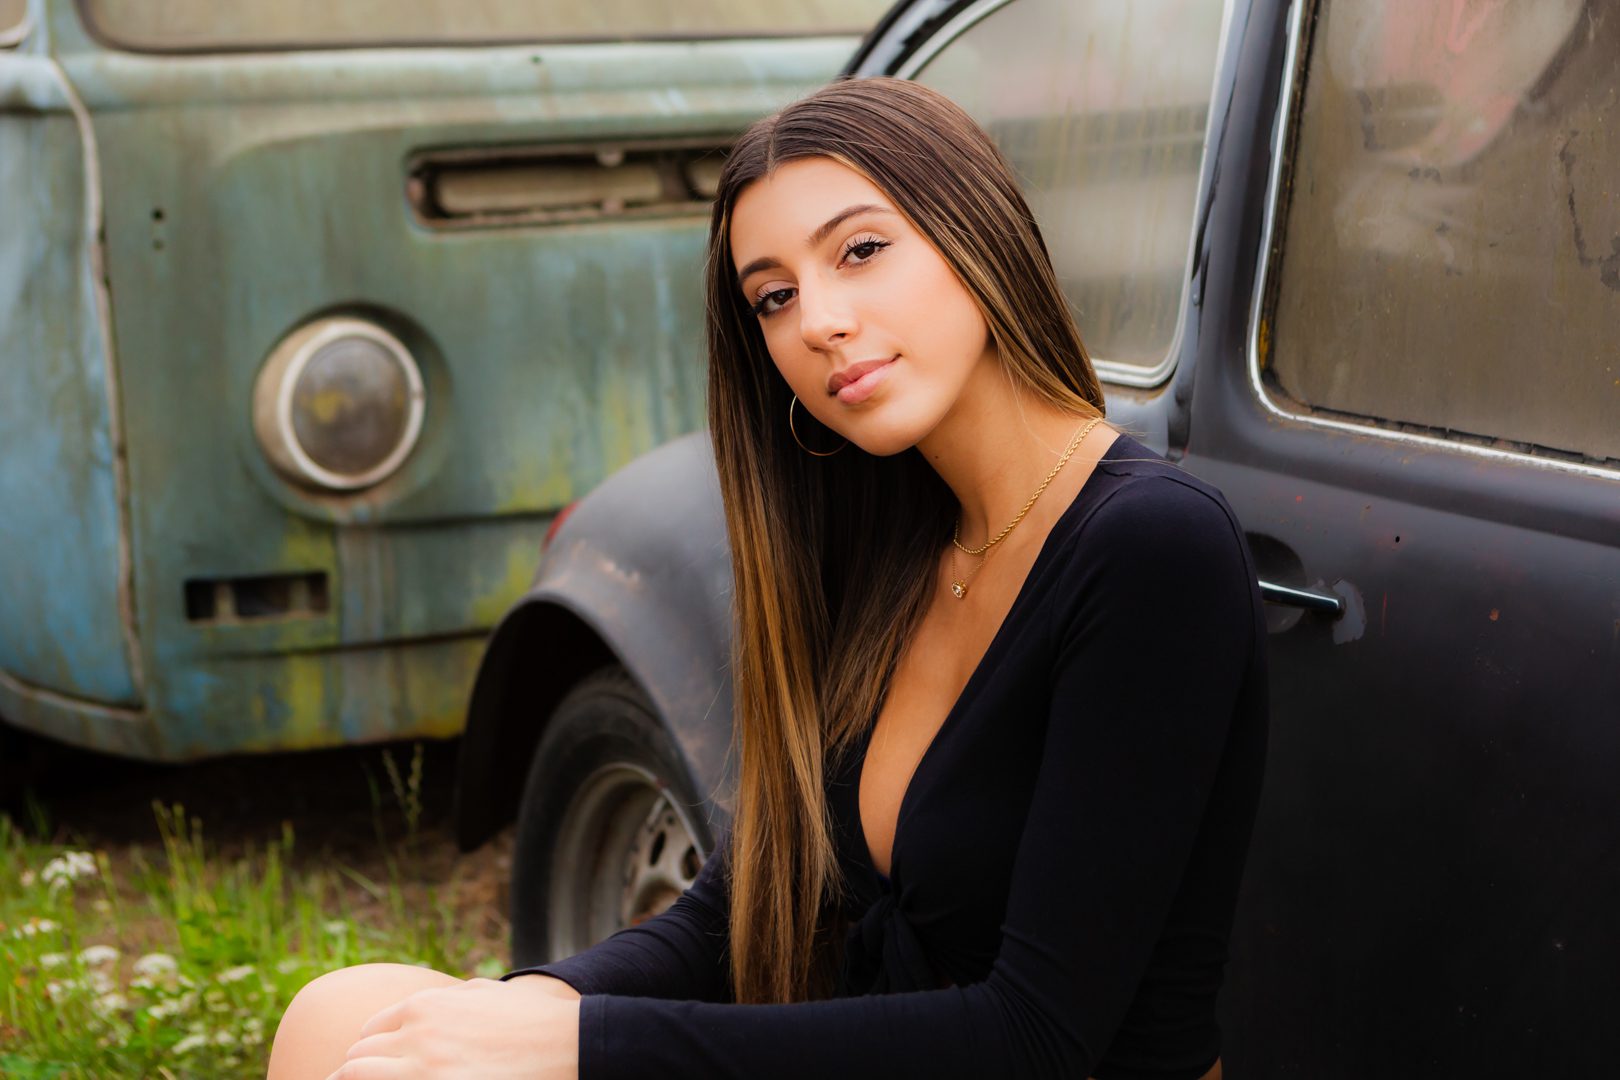 A woman sitting in front of an old car.